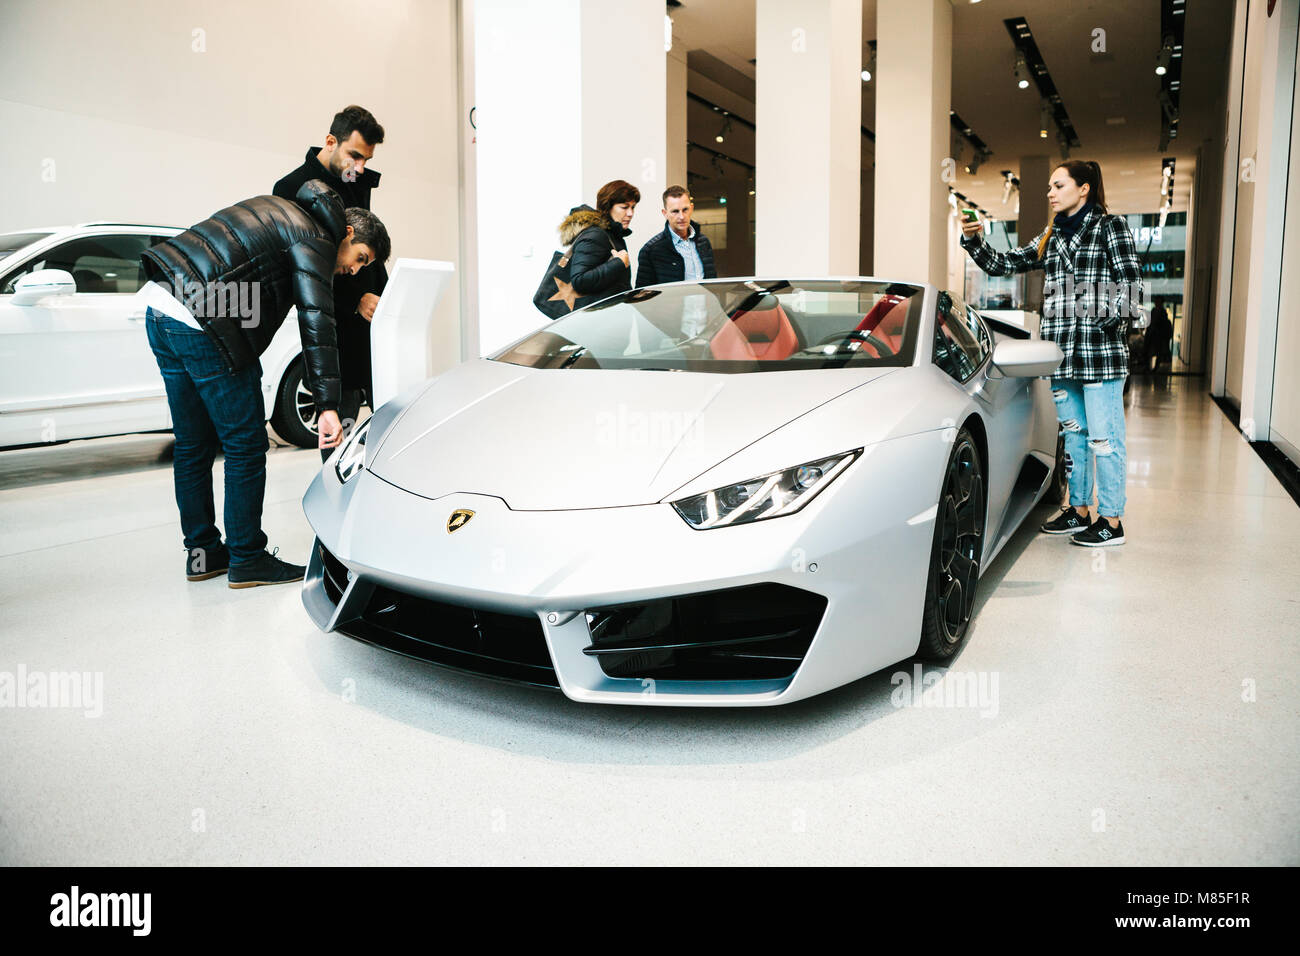 Volkswagen Group Forum - auto show in Berlin. Close-up. Buyers and visitors are watching the new Lamborghini sports car. Stock Photo